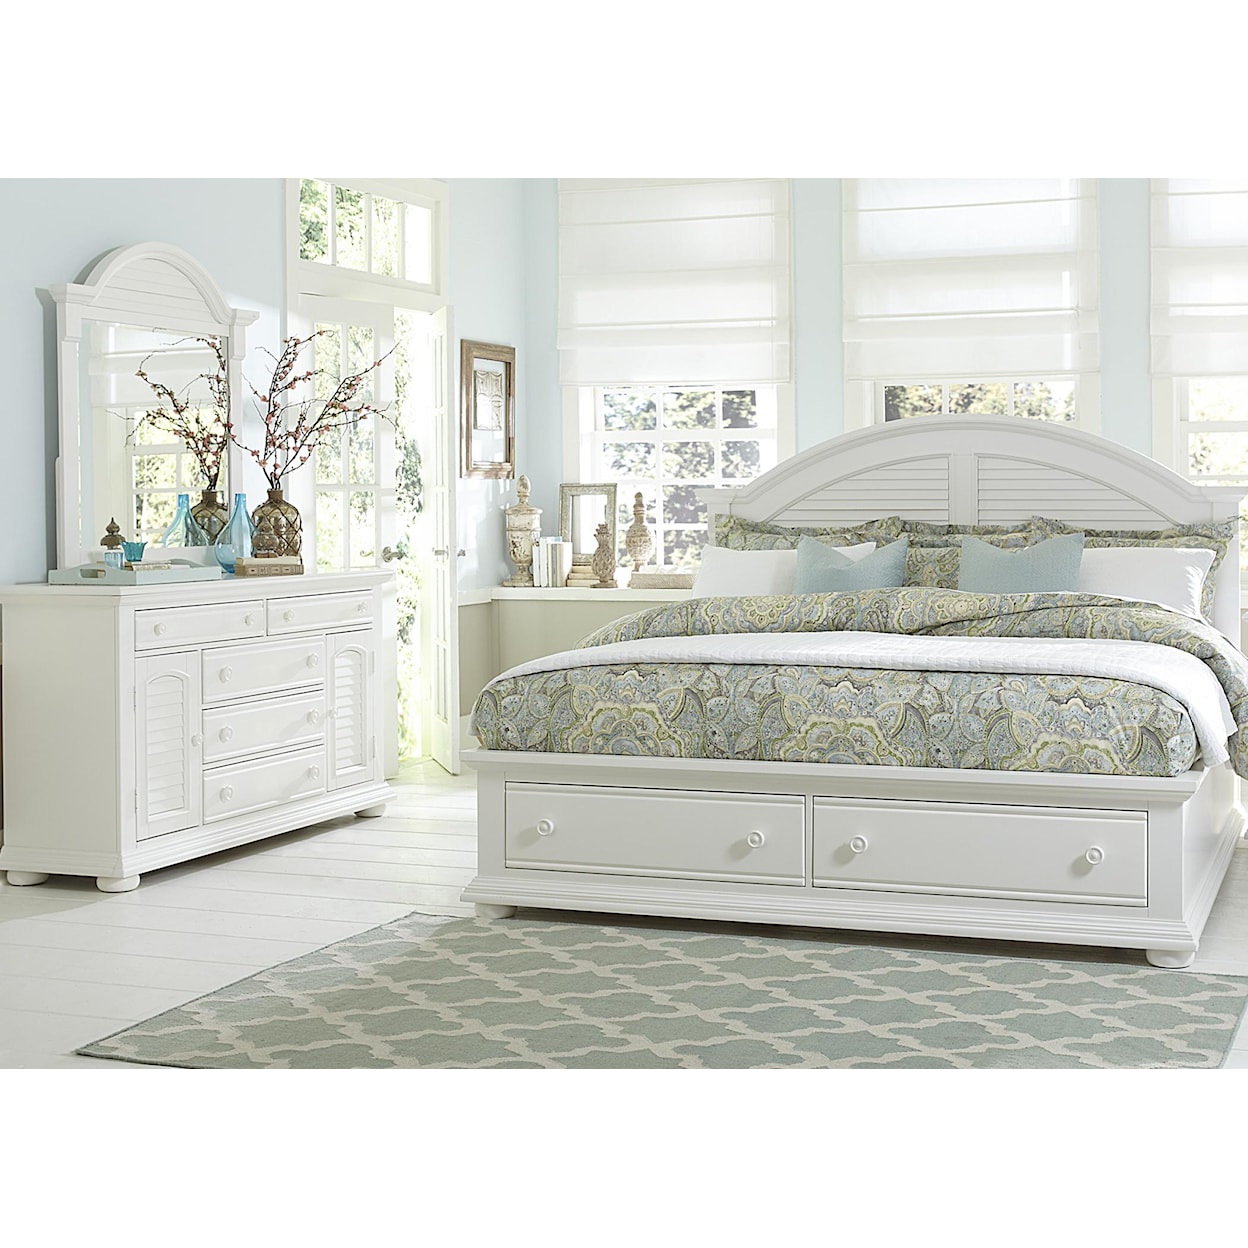 Libby Summer House King Bedroom Group